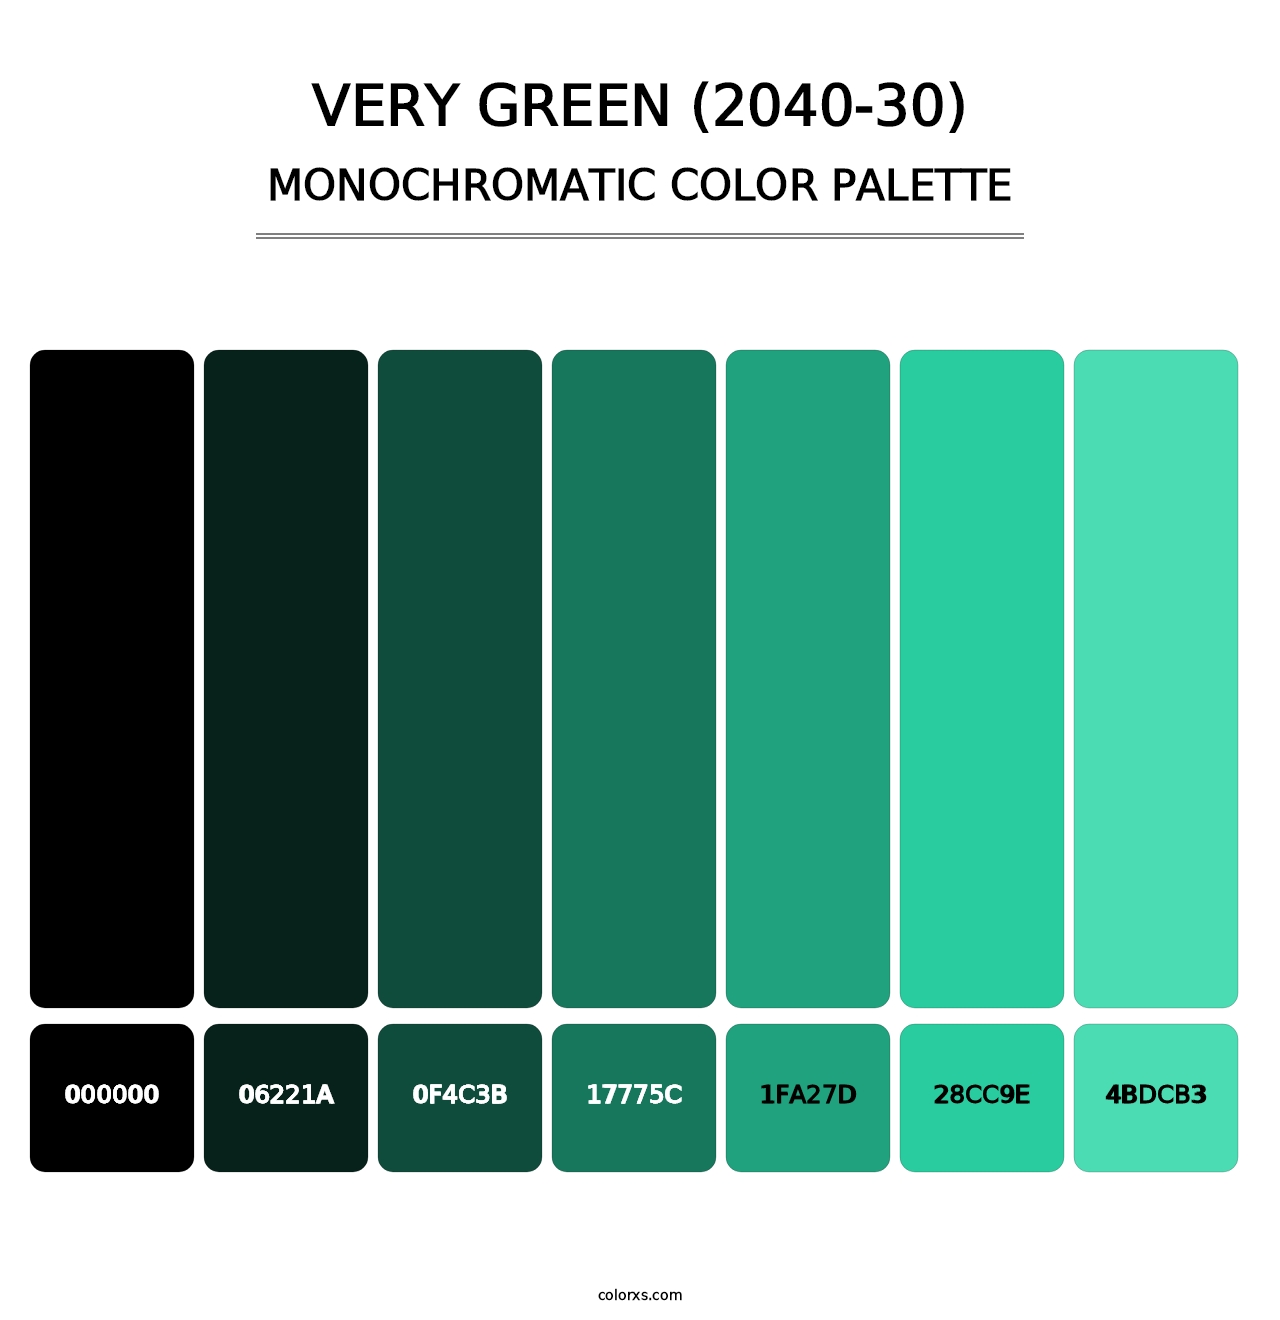 Very Green (2040-30) - Monochromatic Color Palette